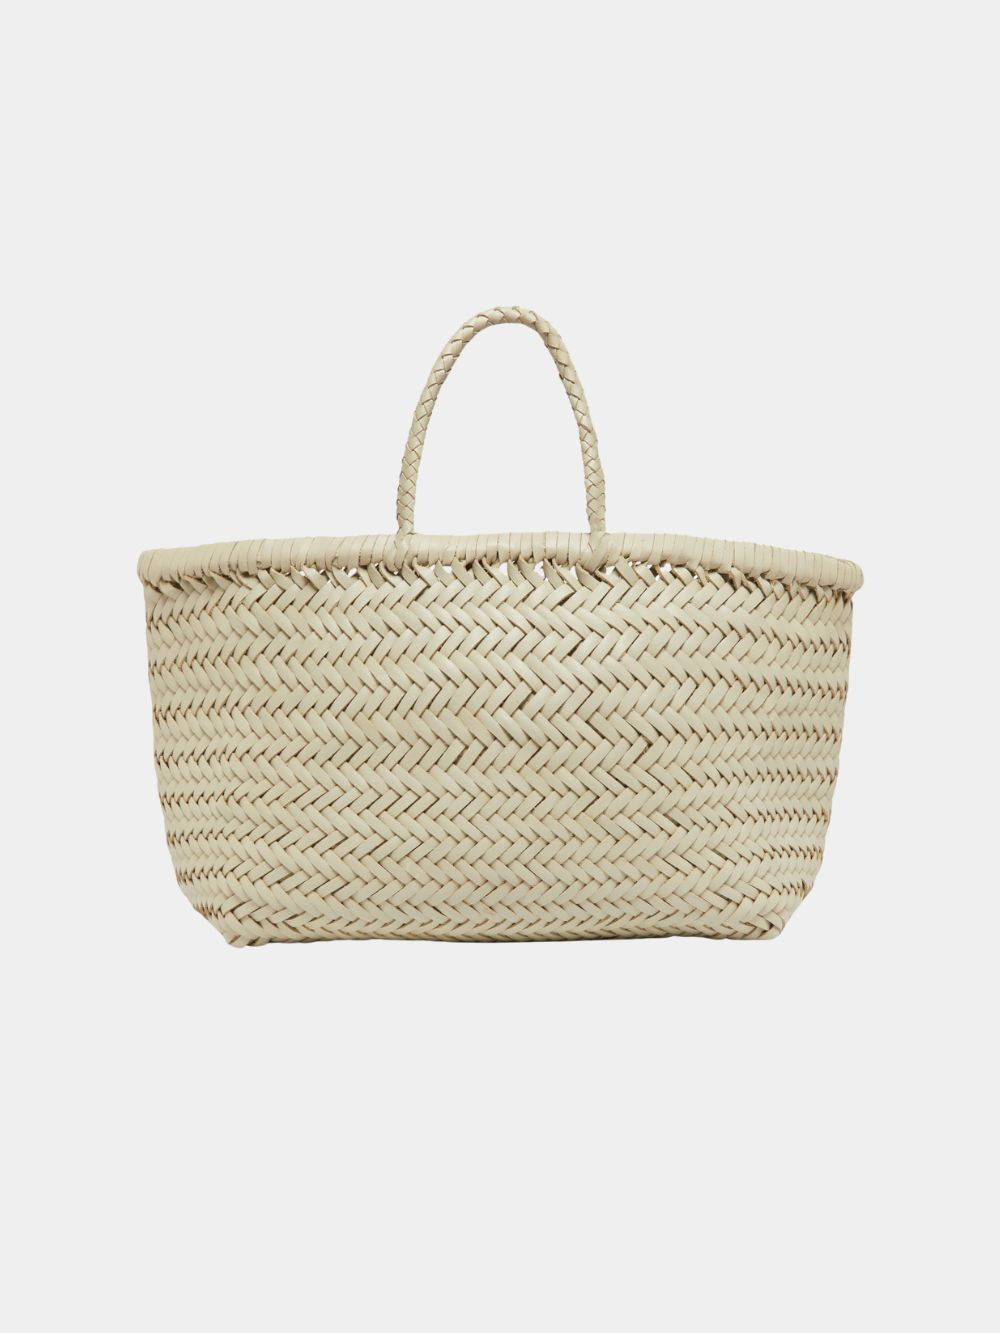 Dragon Diffusion Triple Jump Small Woven Leather Bag in Pearl Grey